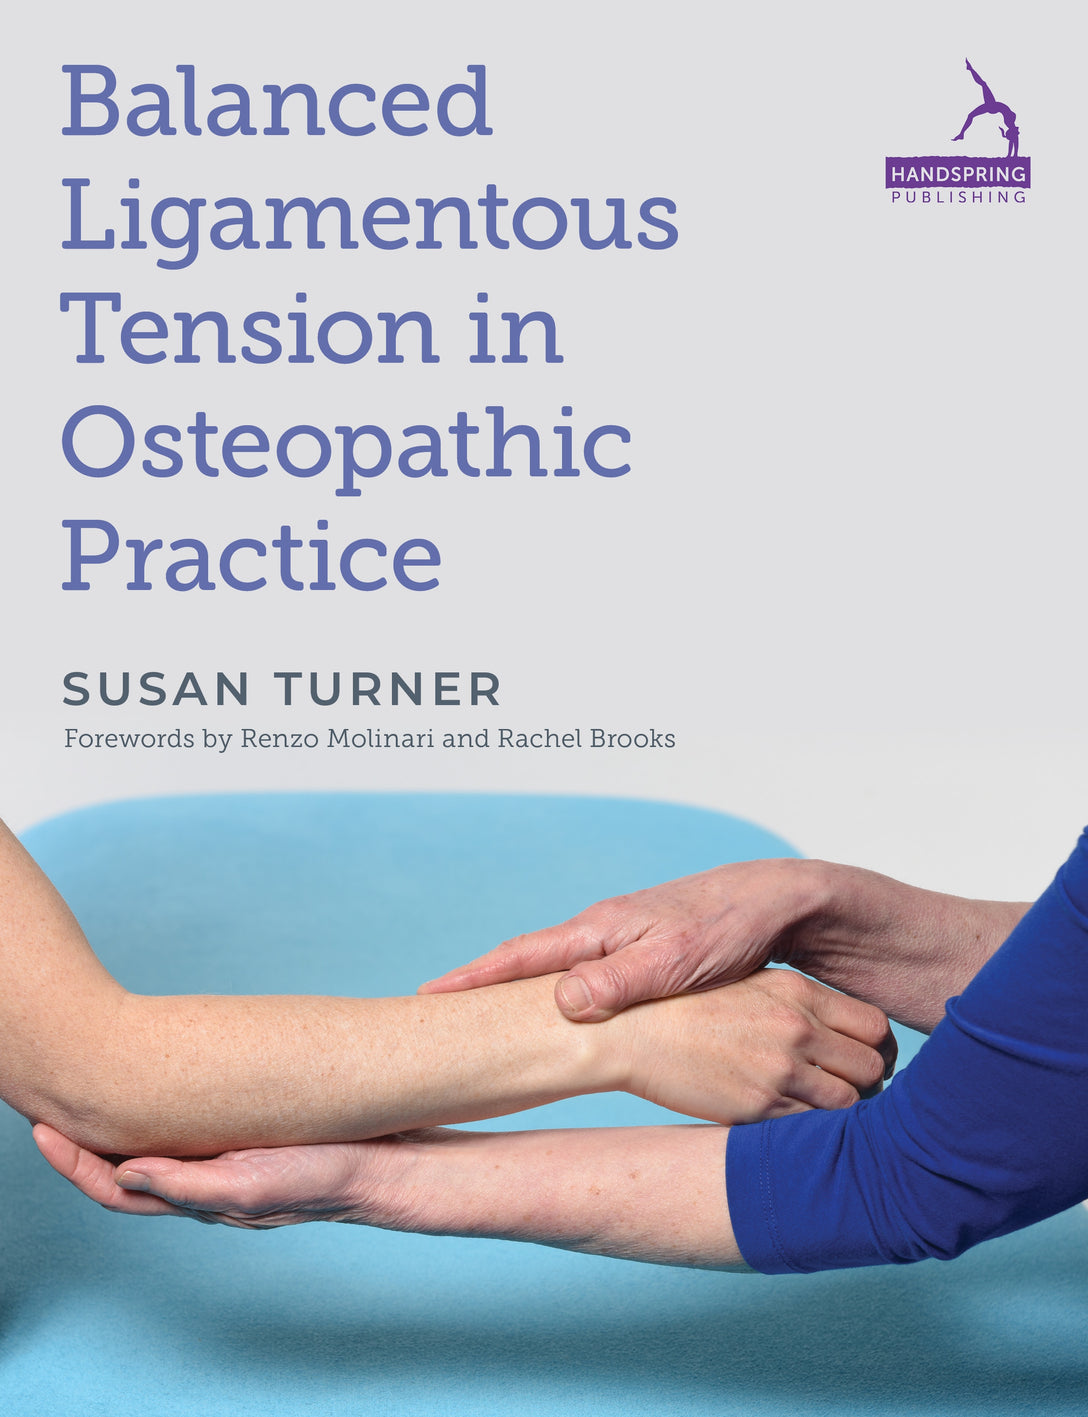 Balanced Ligamentous Tension in Osteopathic Practice by Susan Turner